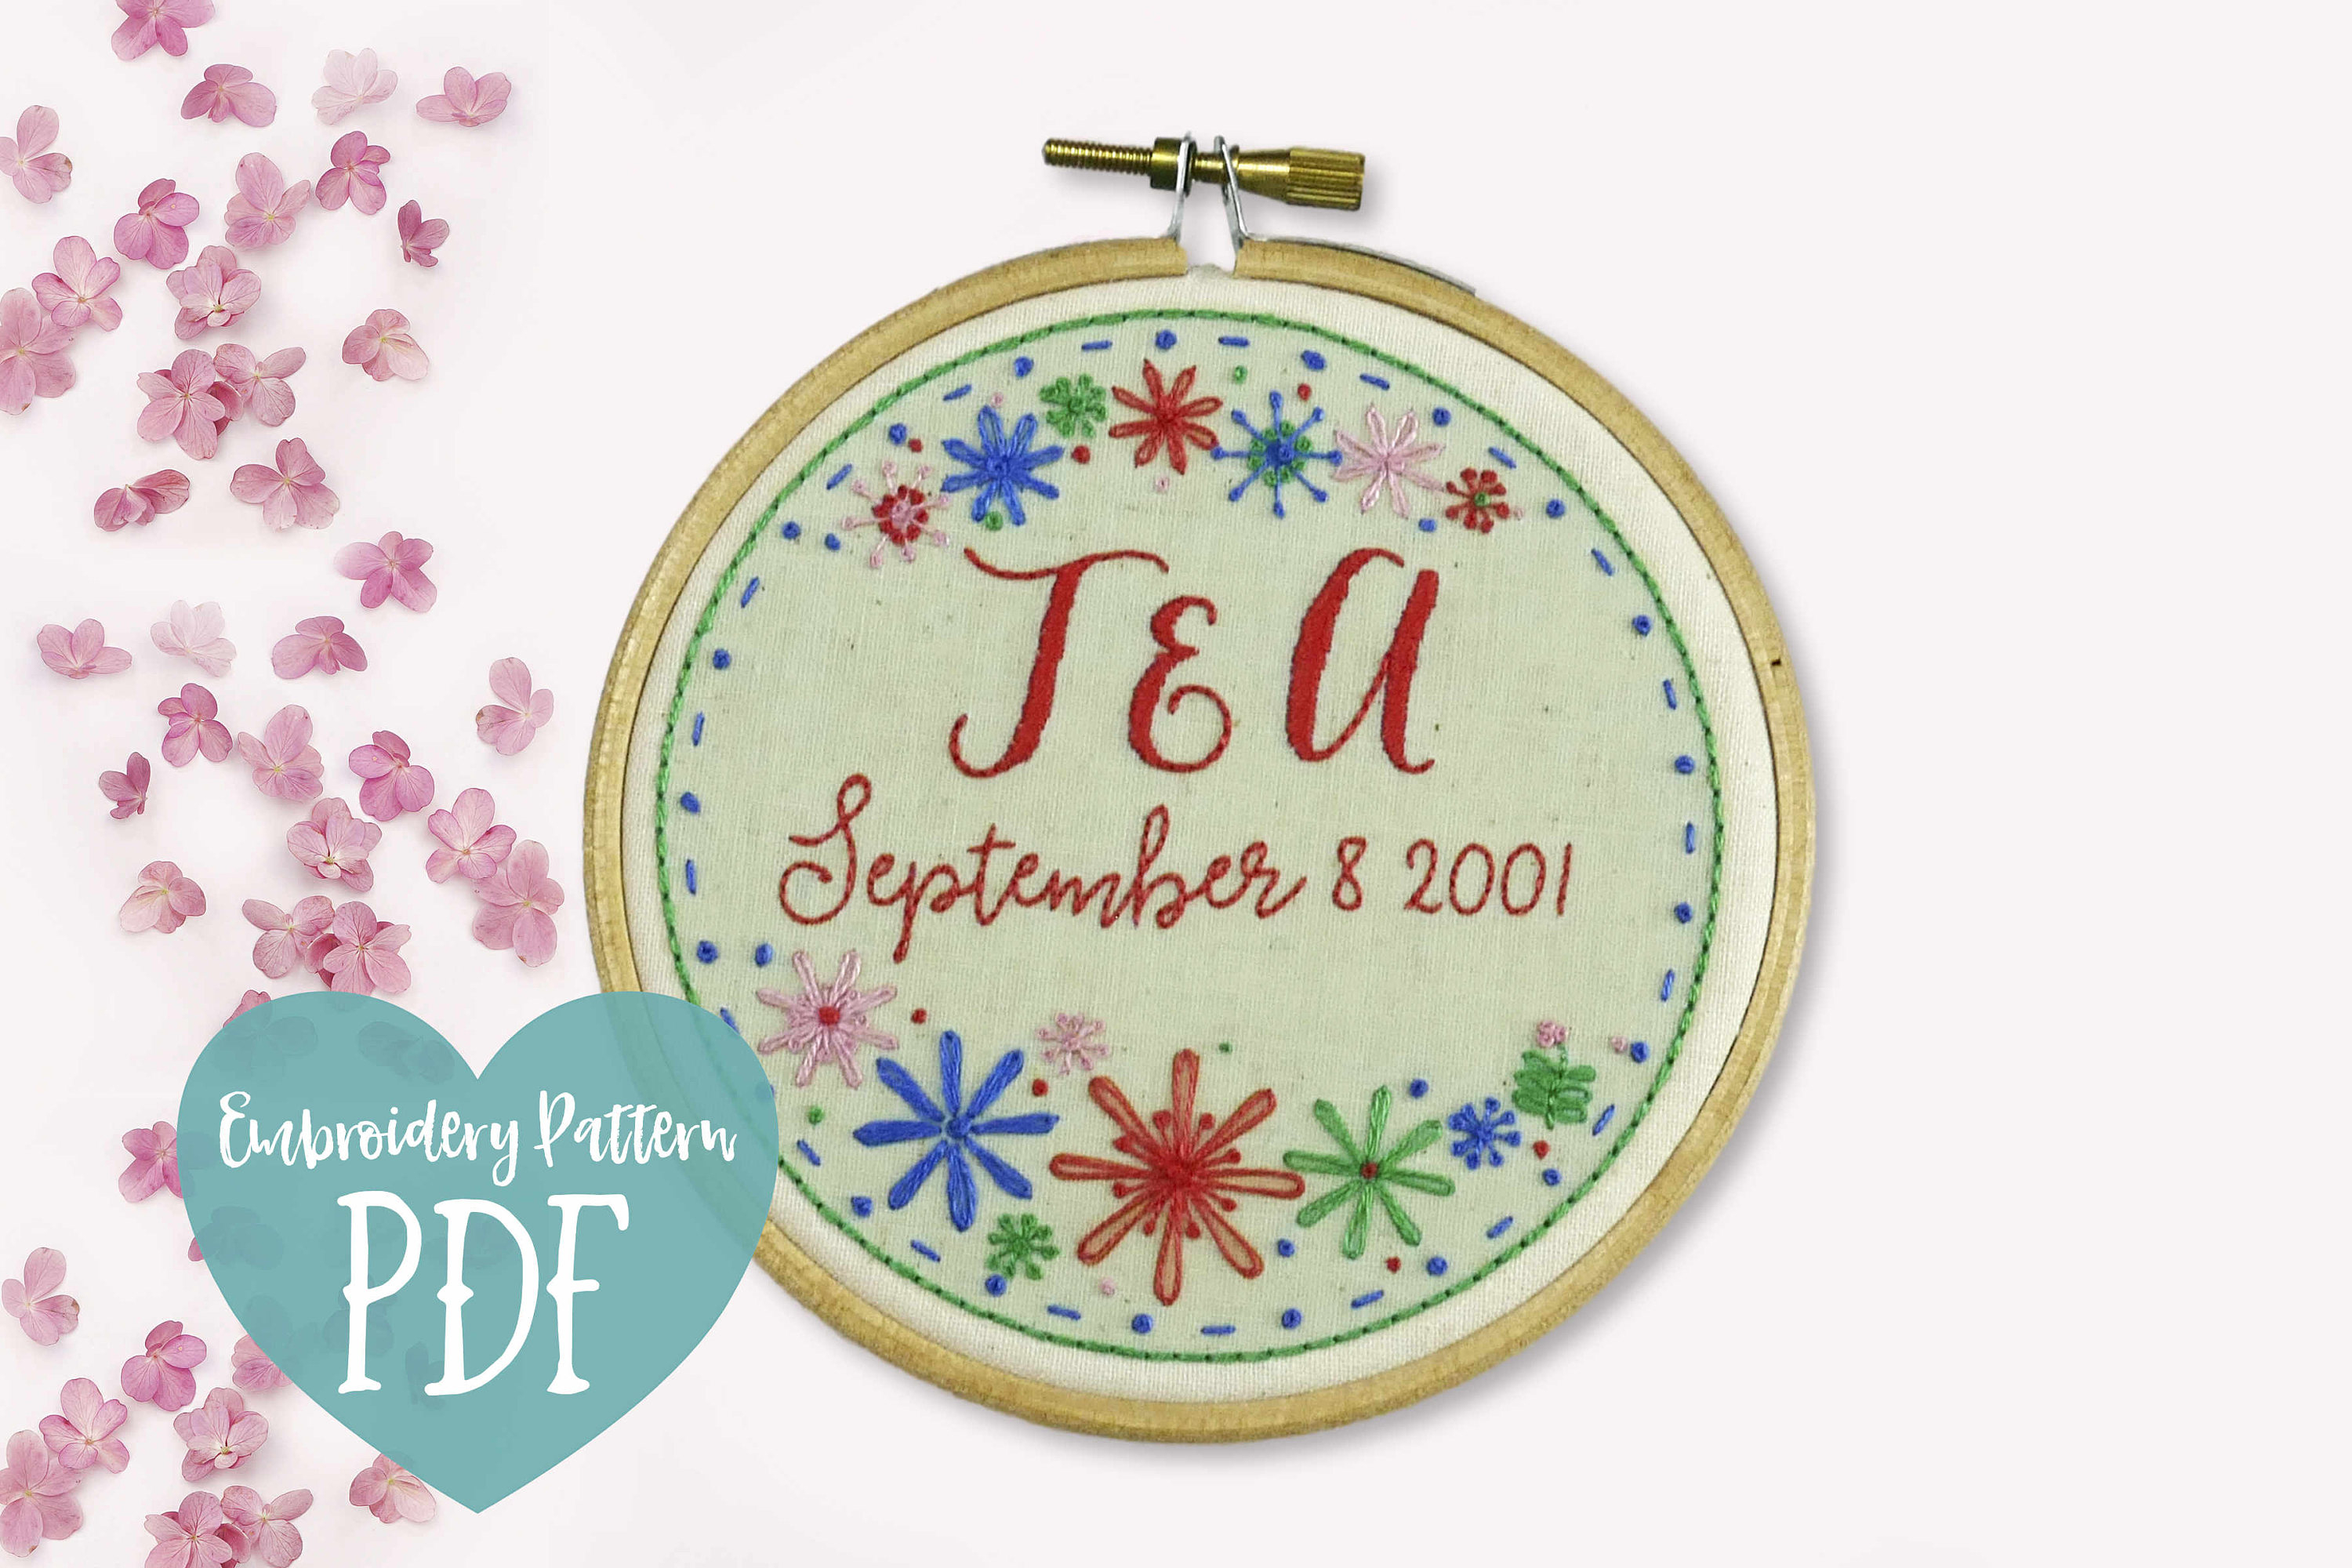 Wedding Embroidery Patterns Personalised Modern Embroidery Designs Floral Hoop Art Wedding Embroidery Hoop Flowers Hand Embroidery Pdf Pattern Needlecraft Patterns